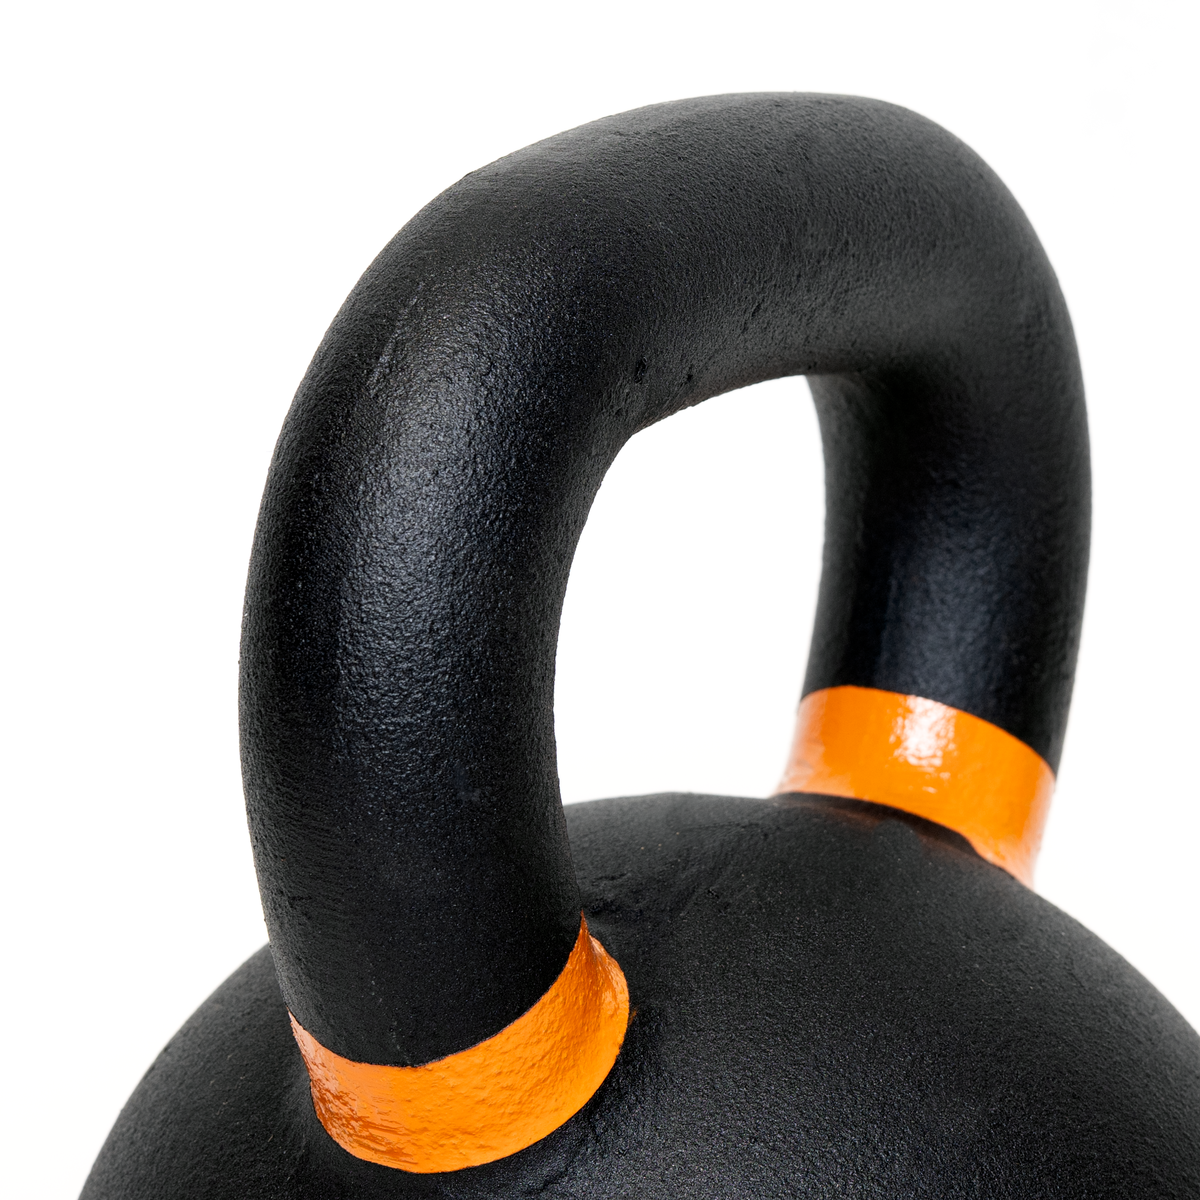 Fitway Cast Iron Kettlebell - 5lb